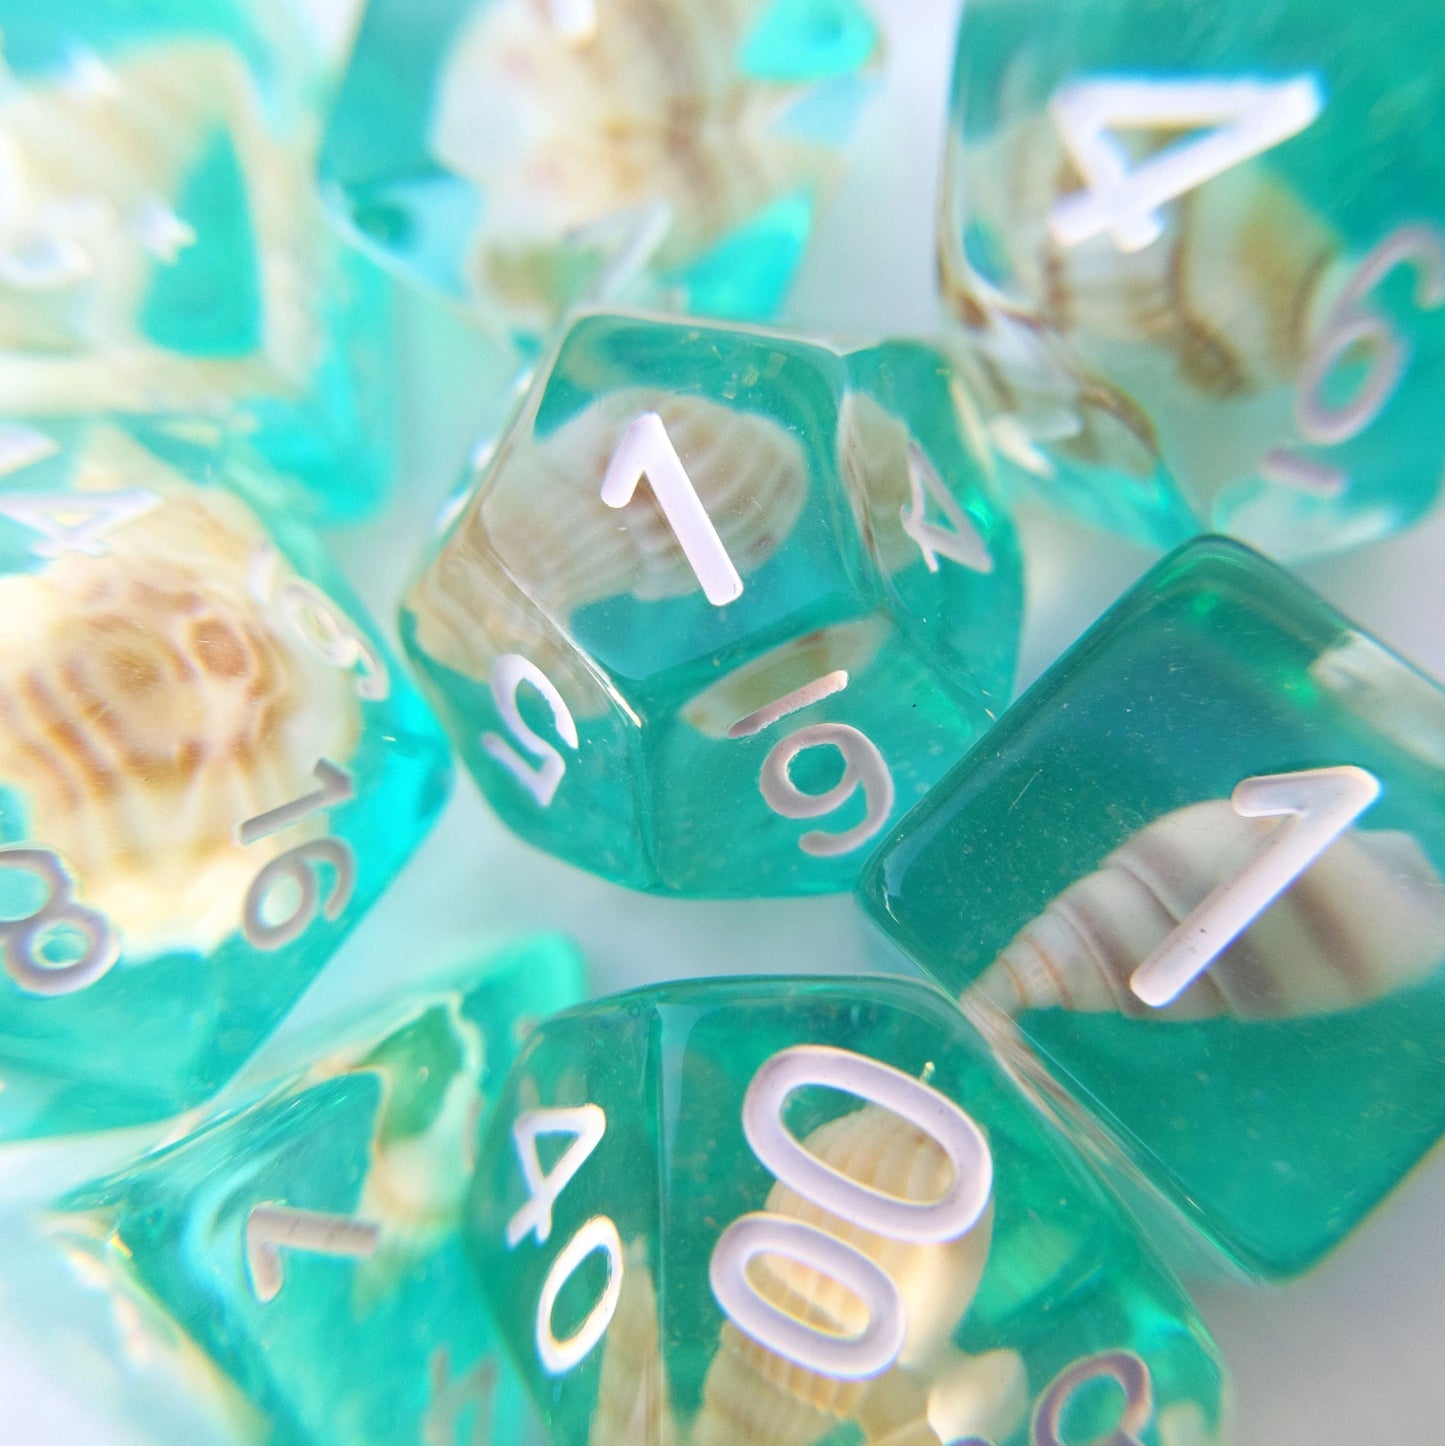 Sea Shell 8 Piece Dice Set. Real tiny sea shells sitting on a layer of teal glittering resin - CozyGamer